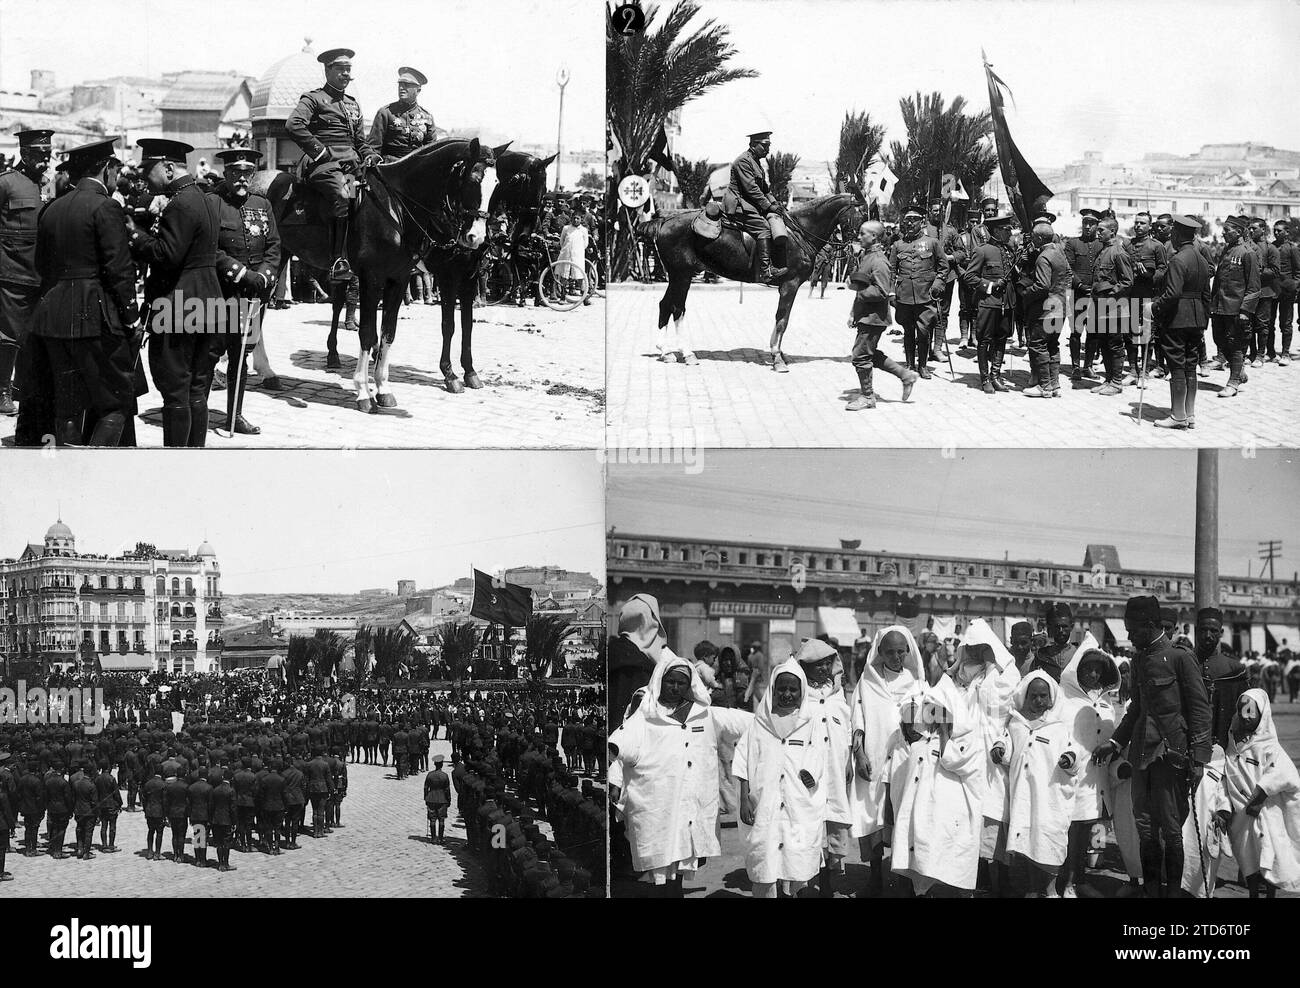 03/31/1920. Melilla. The Flag Pledge. 1.- Generals Fernández and Monteverde during the solemn ceremony. 2.- Ceriñola Recruits Swearing. 3.- appearance of the Plaza de España during the Jura. 4.- Indigenous Children Students of the Spanish Classes Who Attended the Event. Photo: Catalan. Credit: Album / Archivo ABC / CATALAN Stock Photo